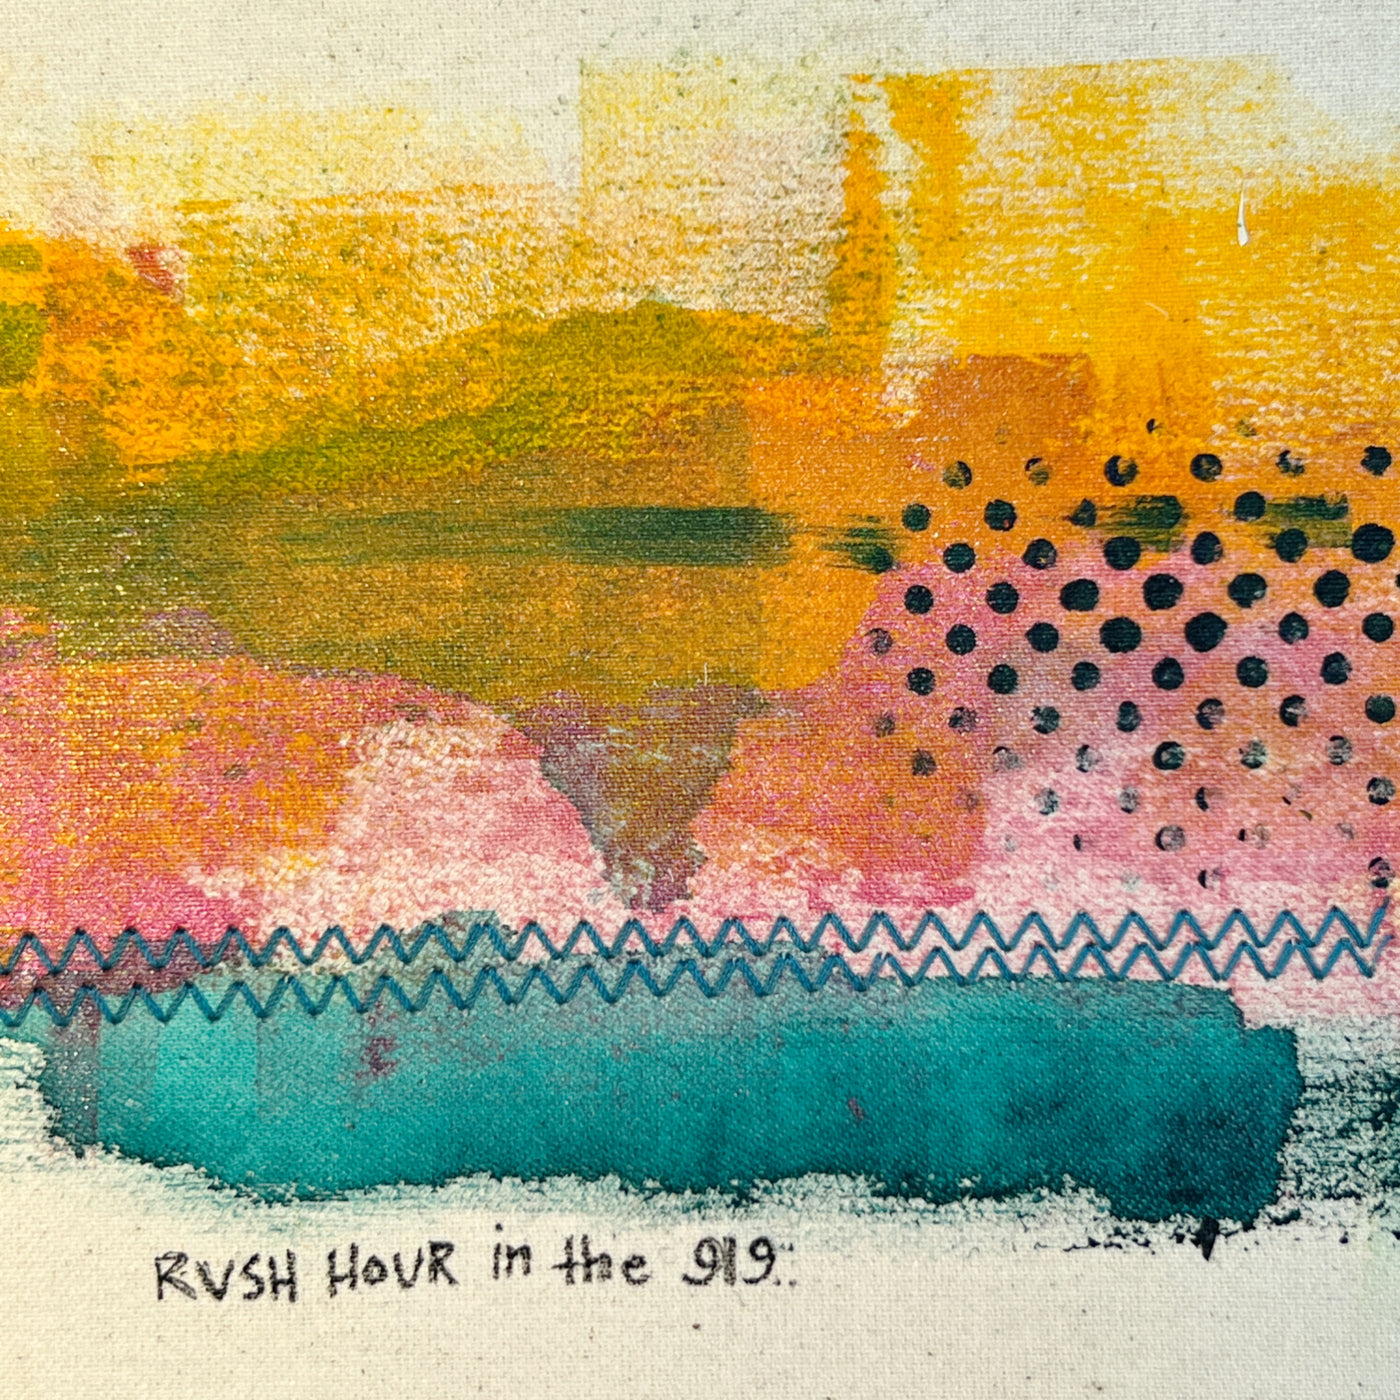 rush hour in the 919 - painted mixed media art print